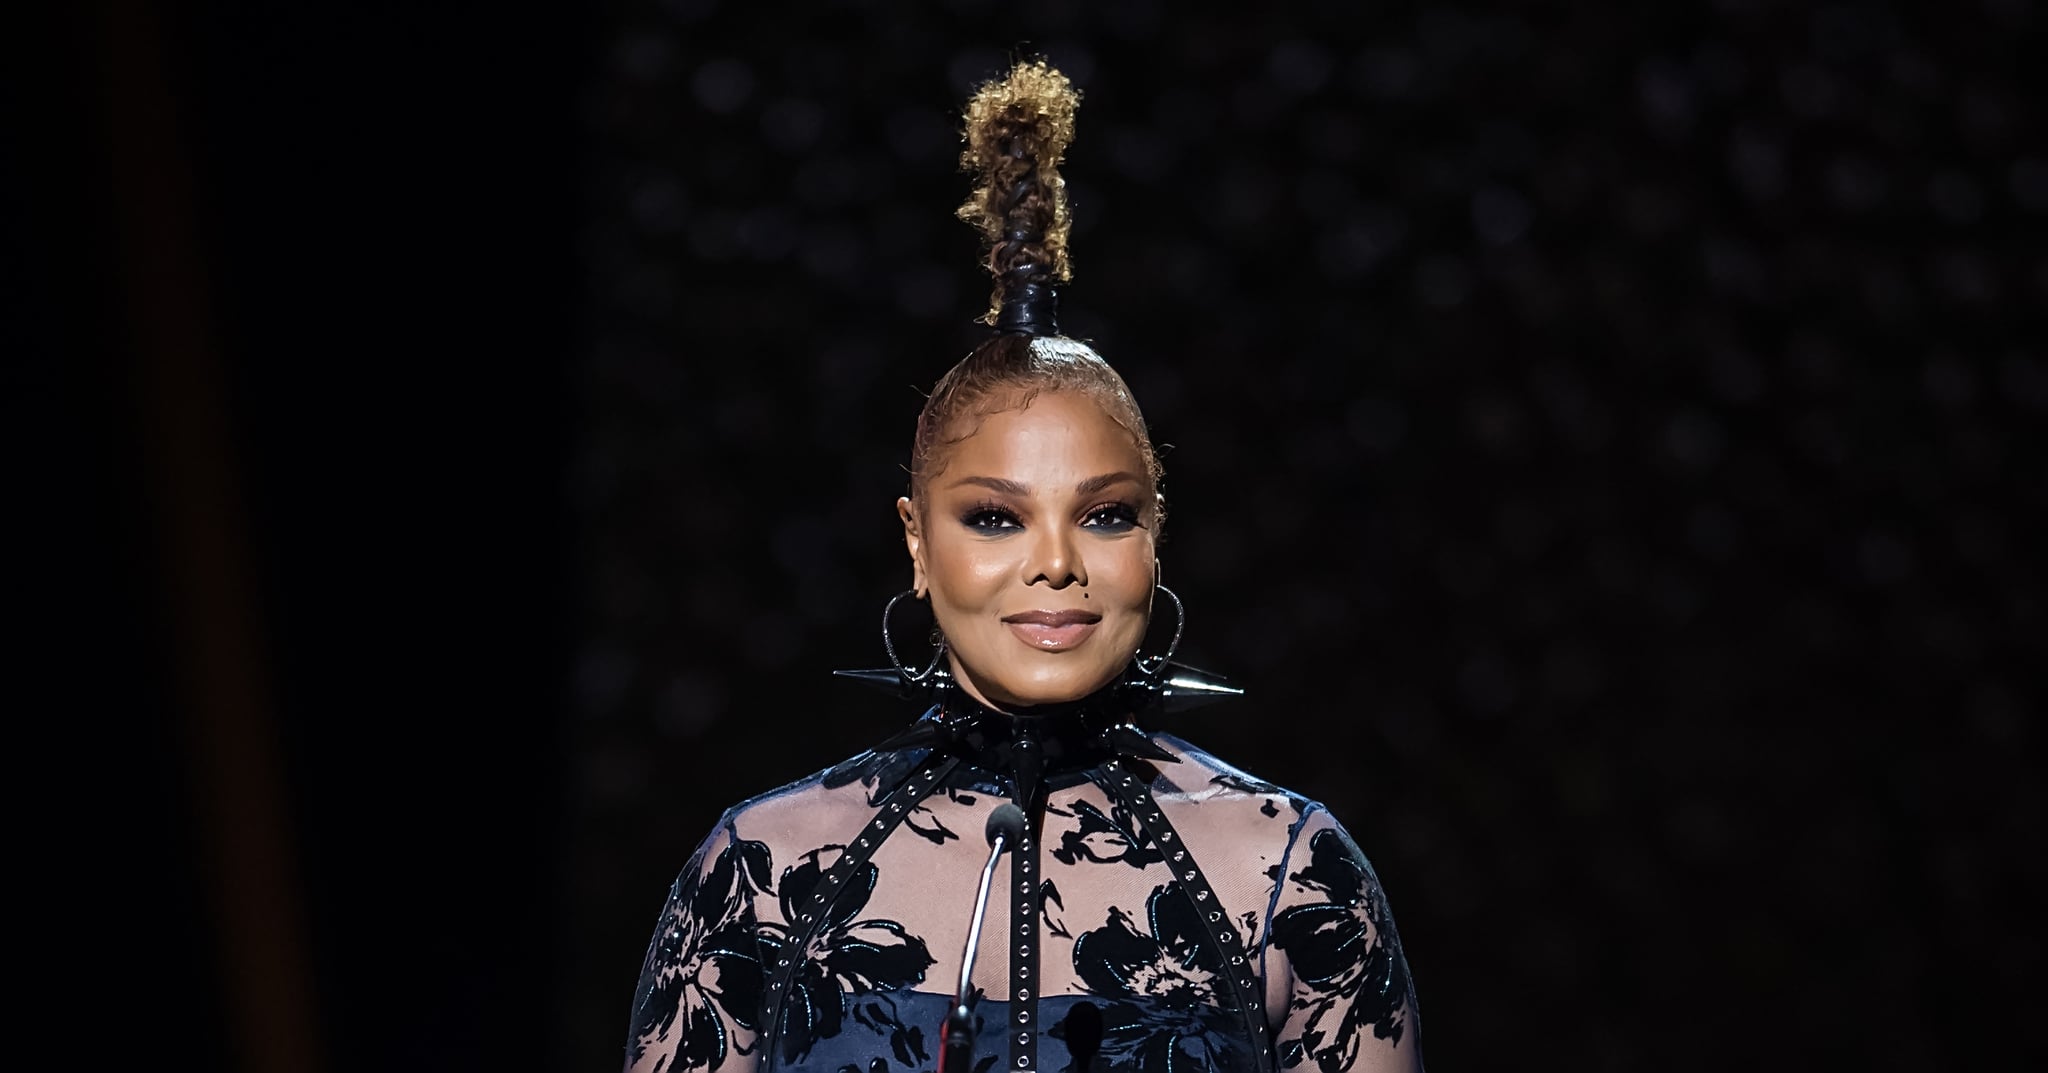 NEWARK, NJ - AUGUST 26:  Singer-songwriter and Rock Star Award recipient Janet Jackson speaks on stage during the 2018 Black Girls Rock! at New Jersey Performing Arts Centre on August 26, 2018 in Newark, New Jersey.  (Photo by Gilbert Carrasquillo/WireImage)